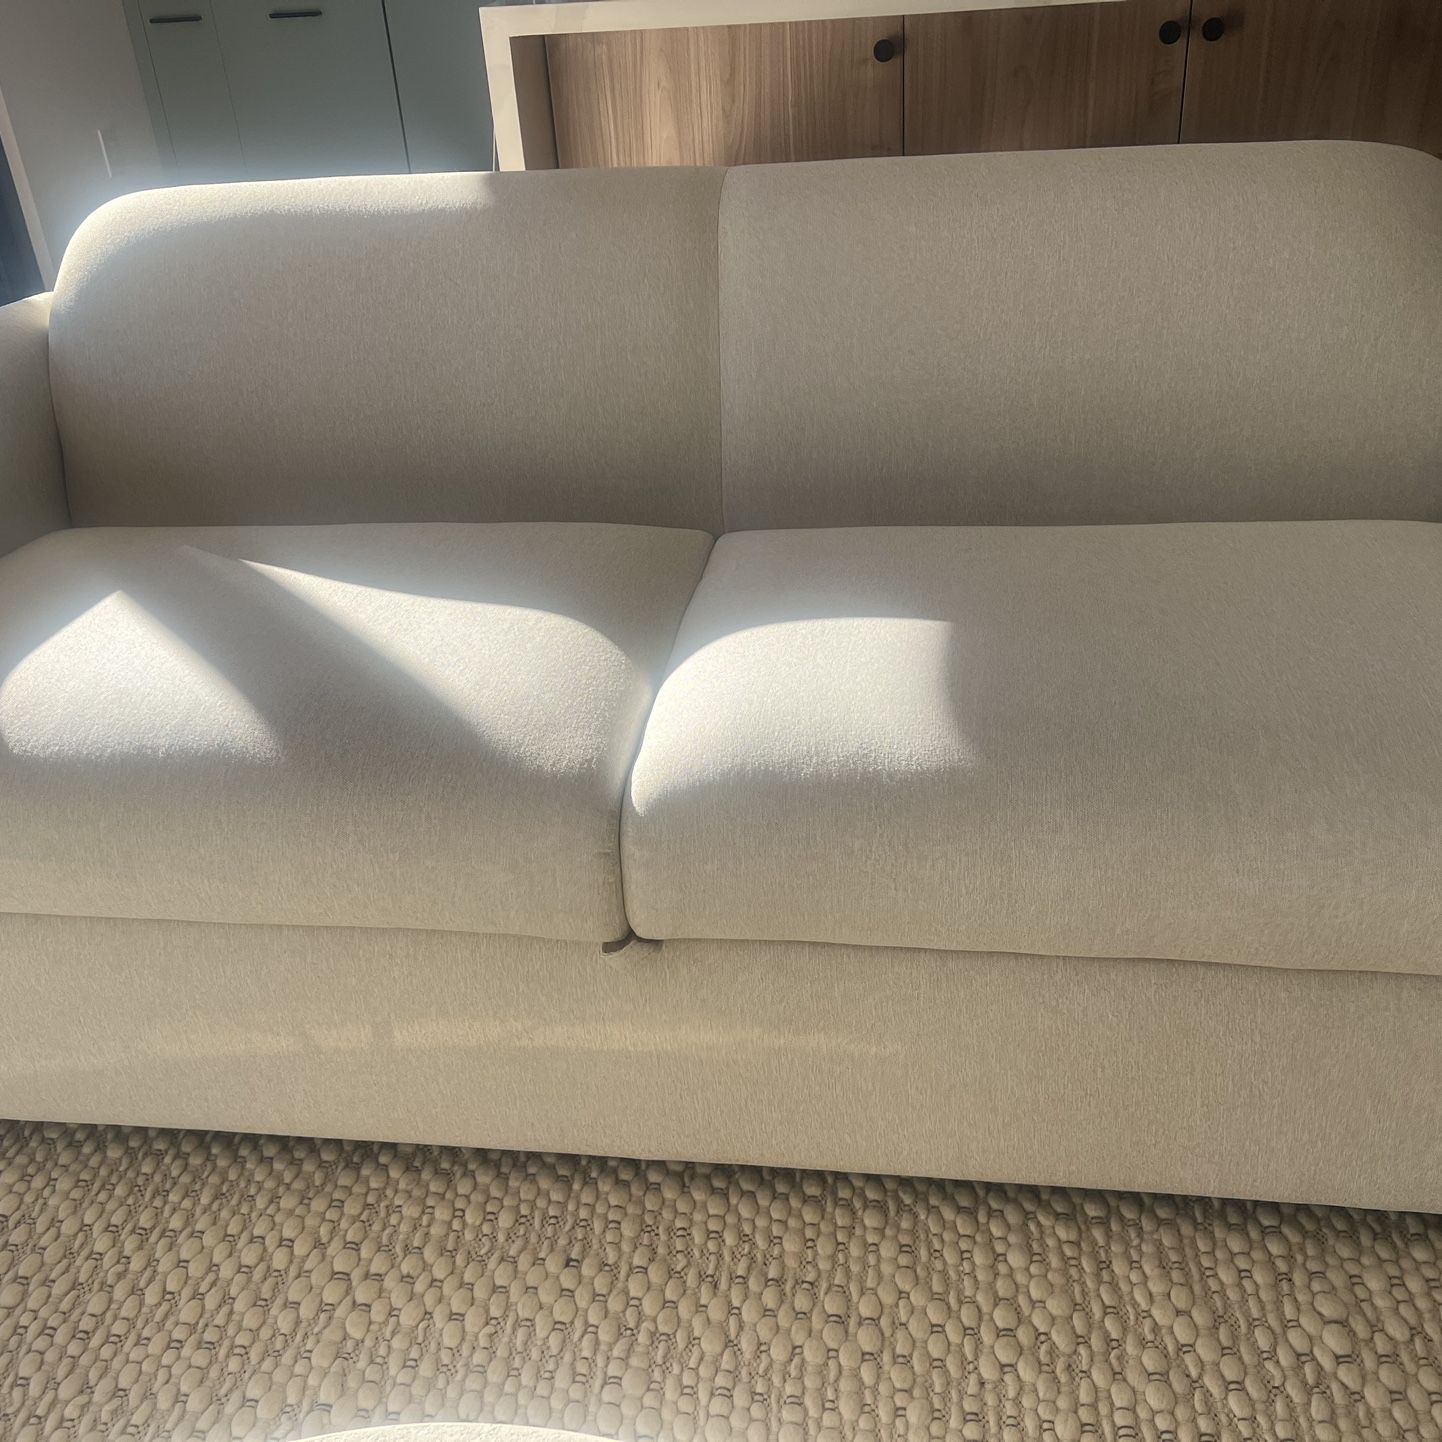 West Elm 78’ Storage couch in